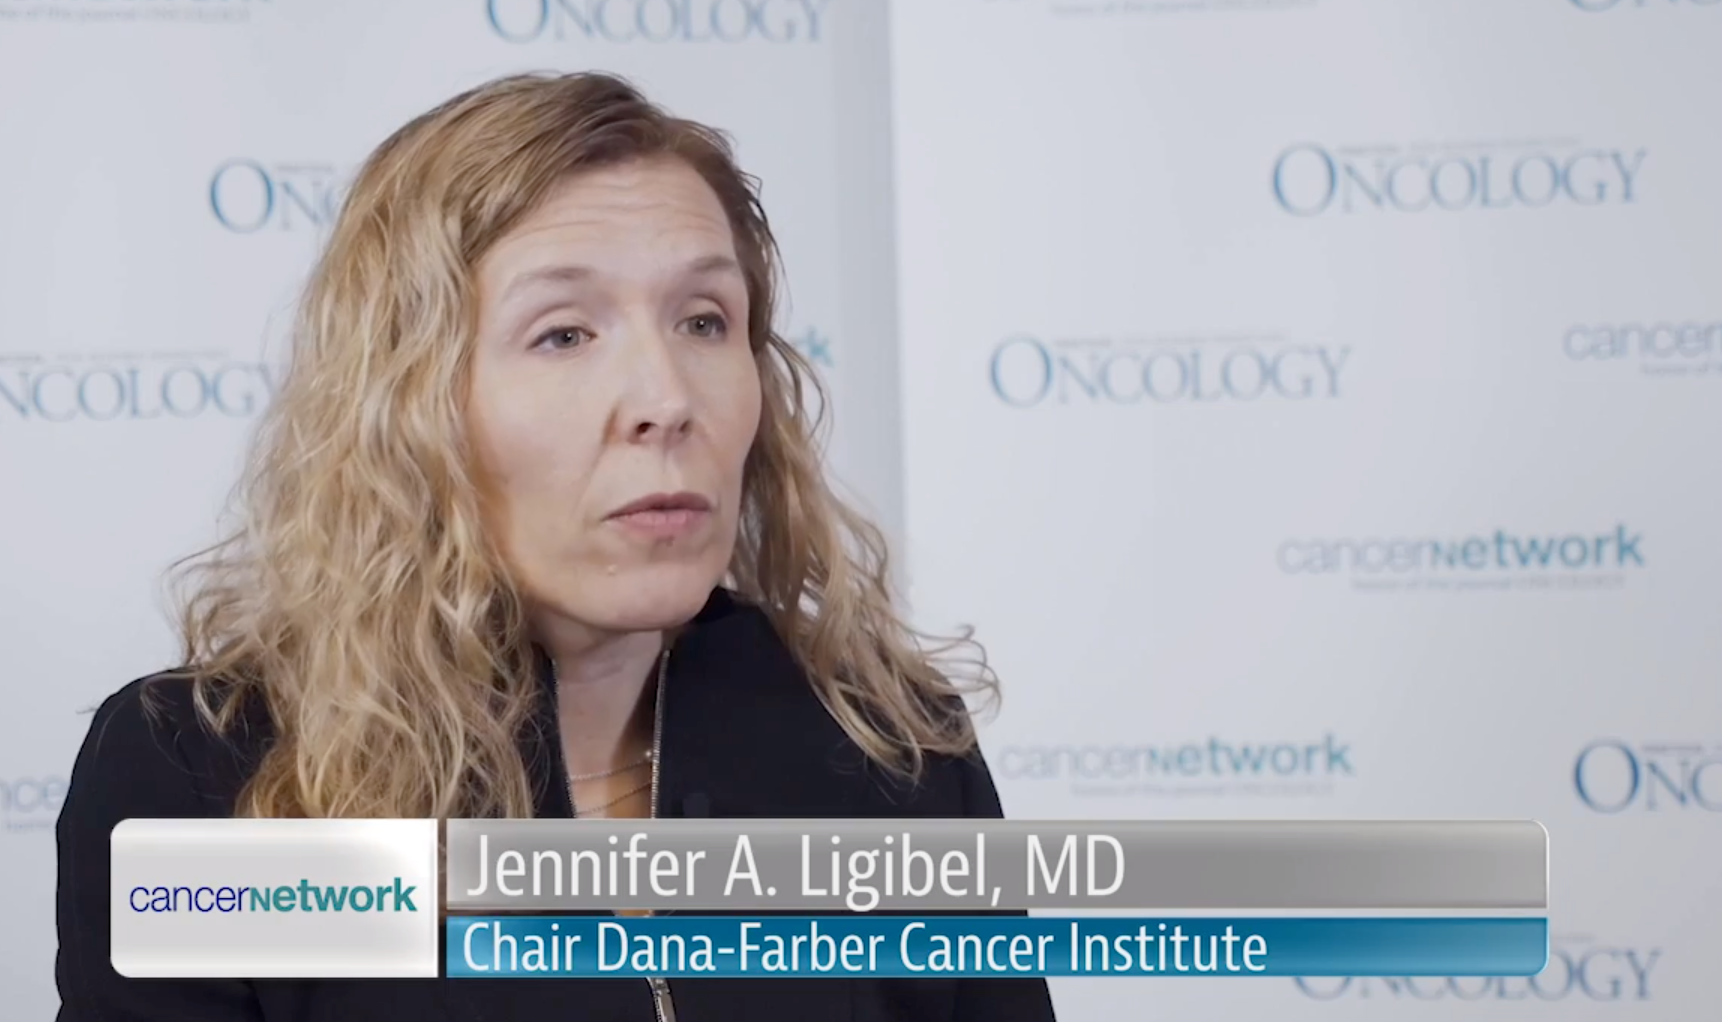 Dr. Jennifer A. Ligibel on Diet and Exercise Interventions for Reducing Breast Cancer Recurrences